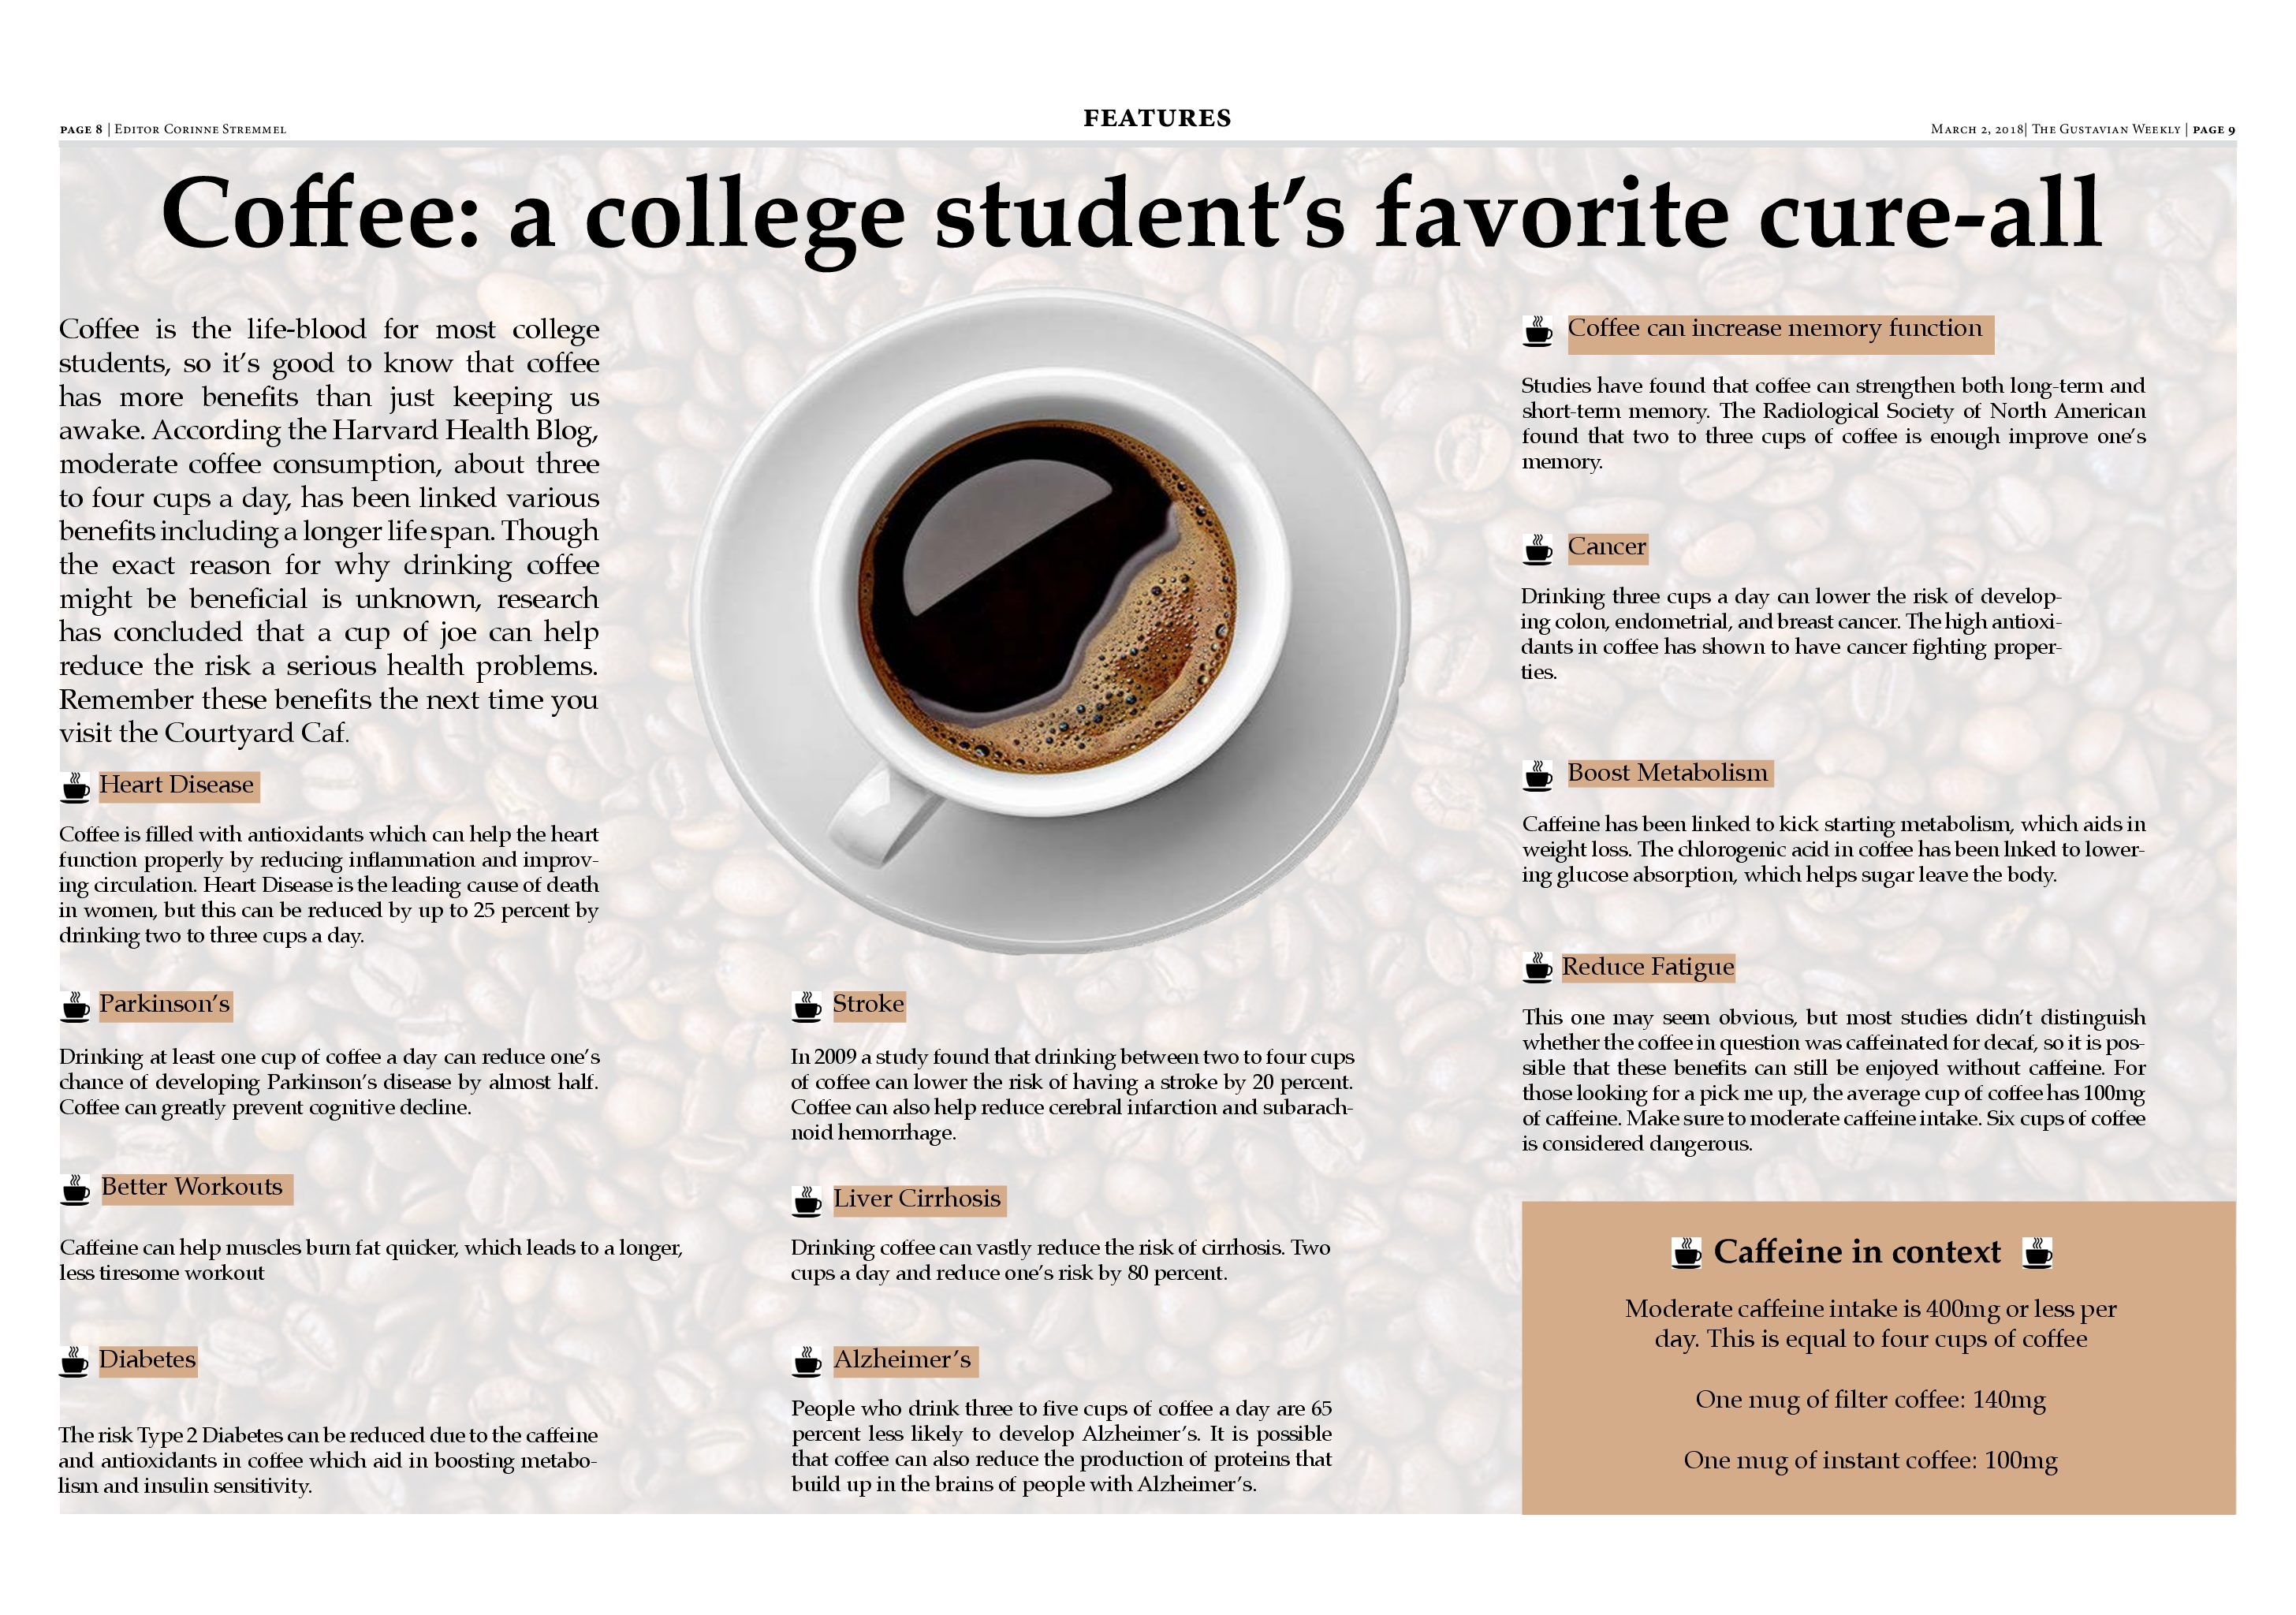 Benefits of coffee for college students